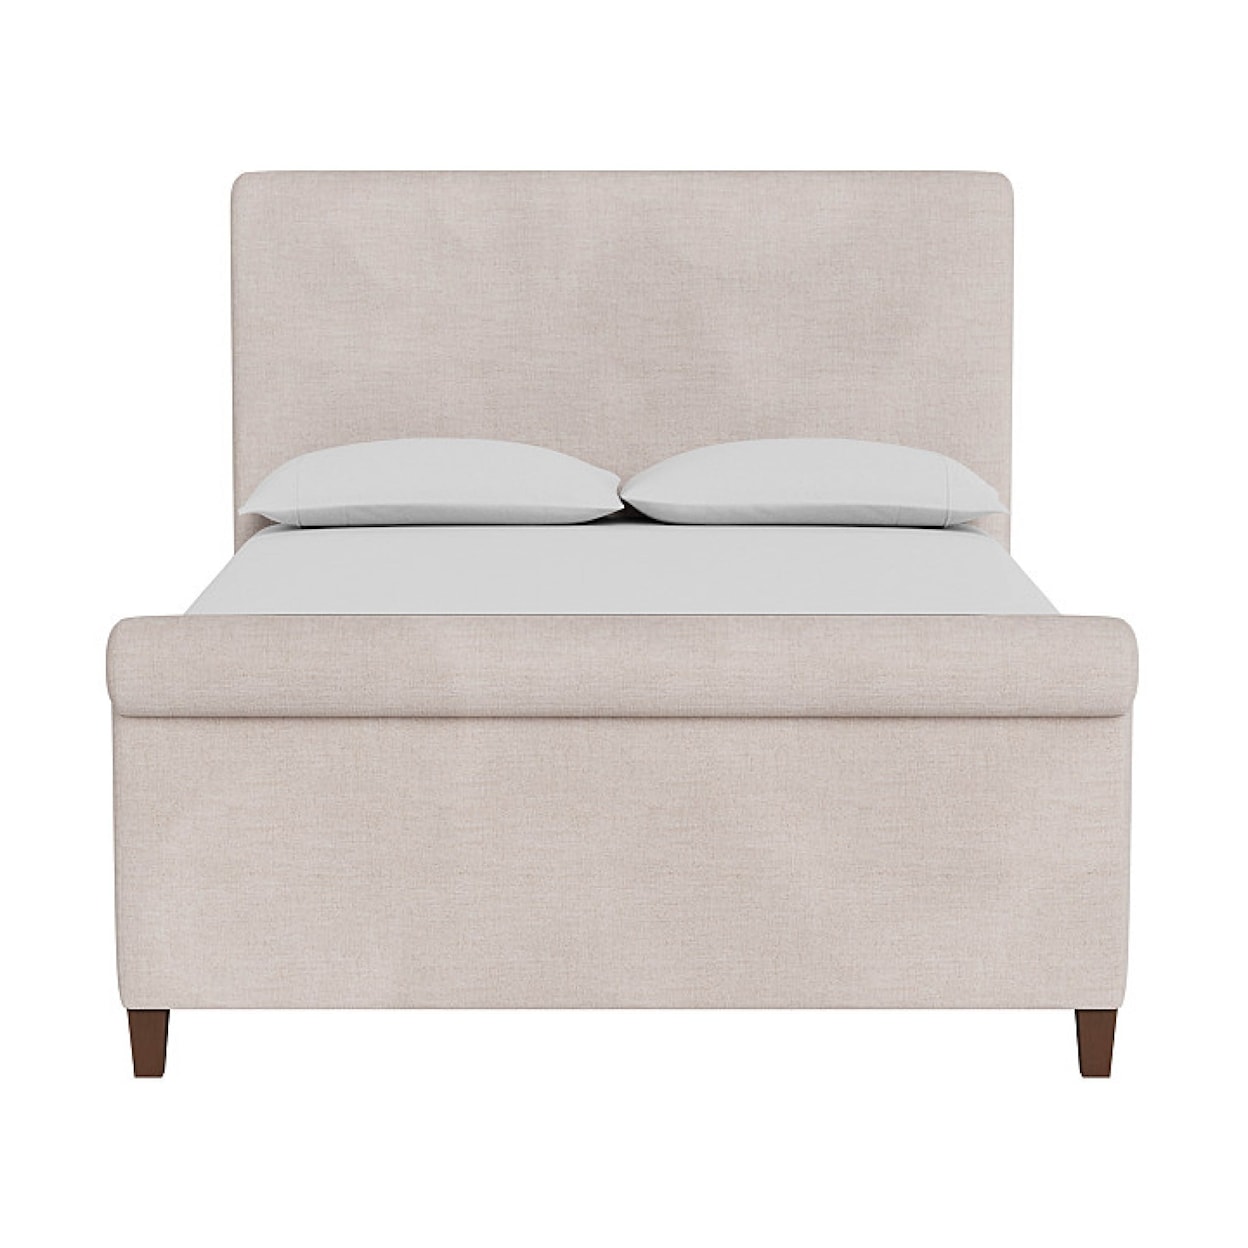 Universal Special Order King Cape May Bed